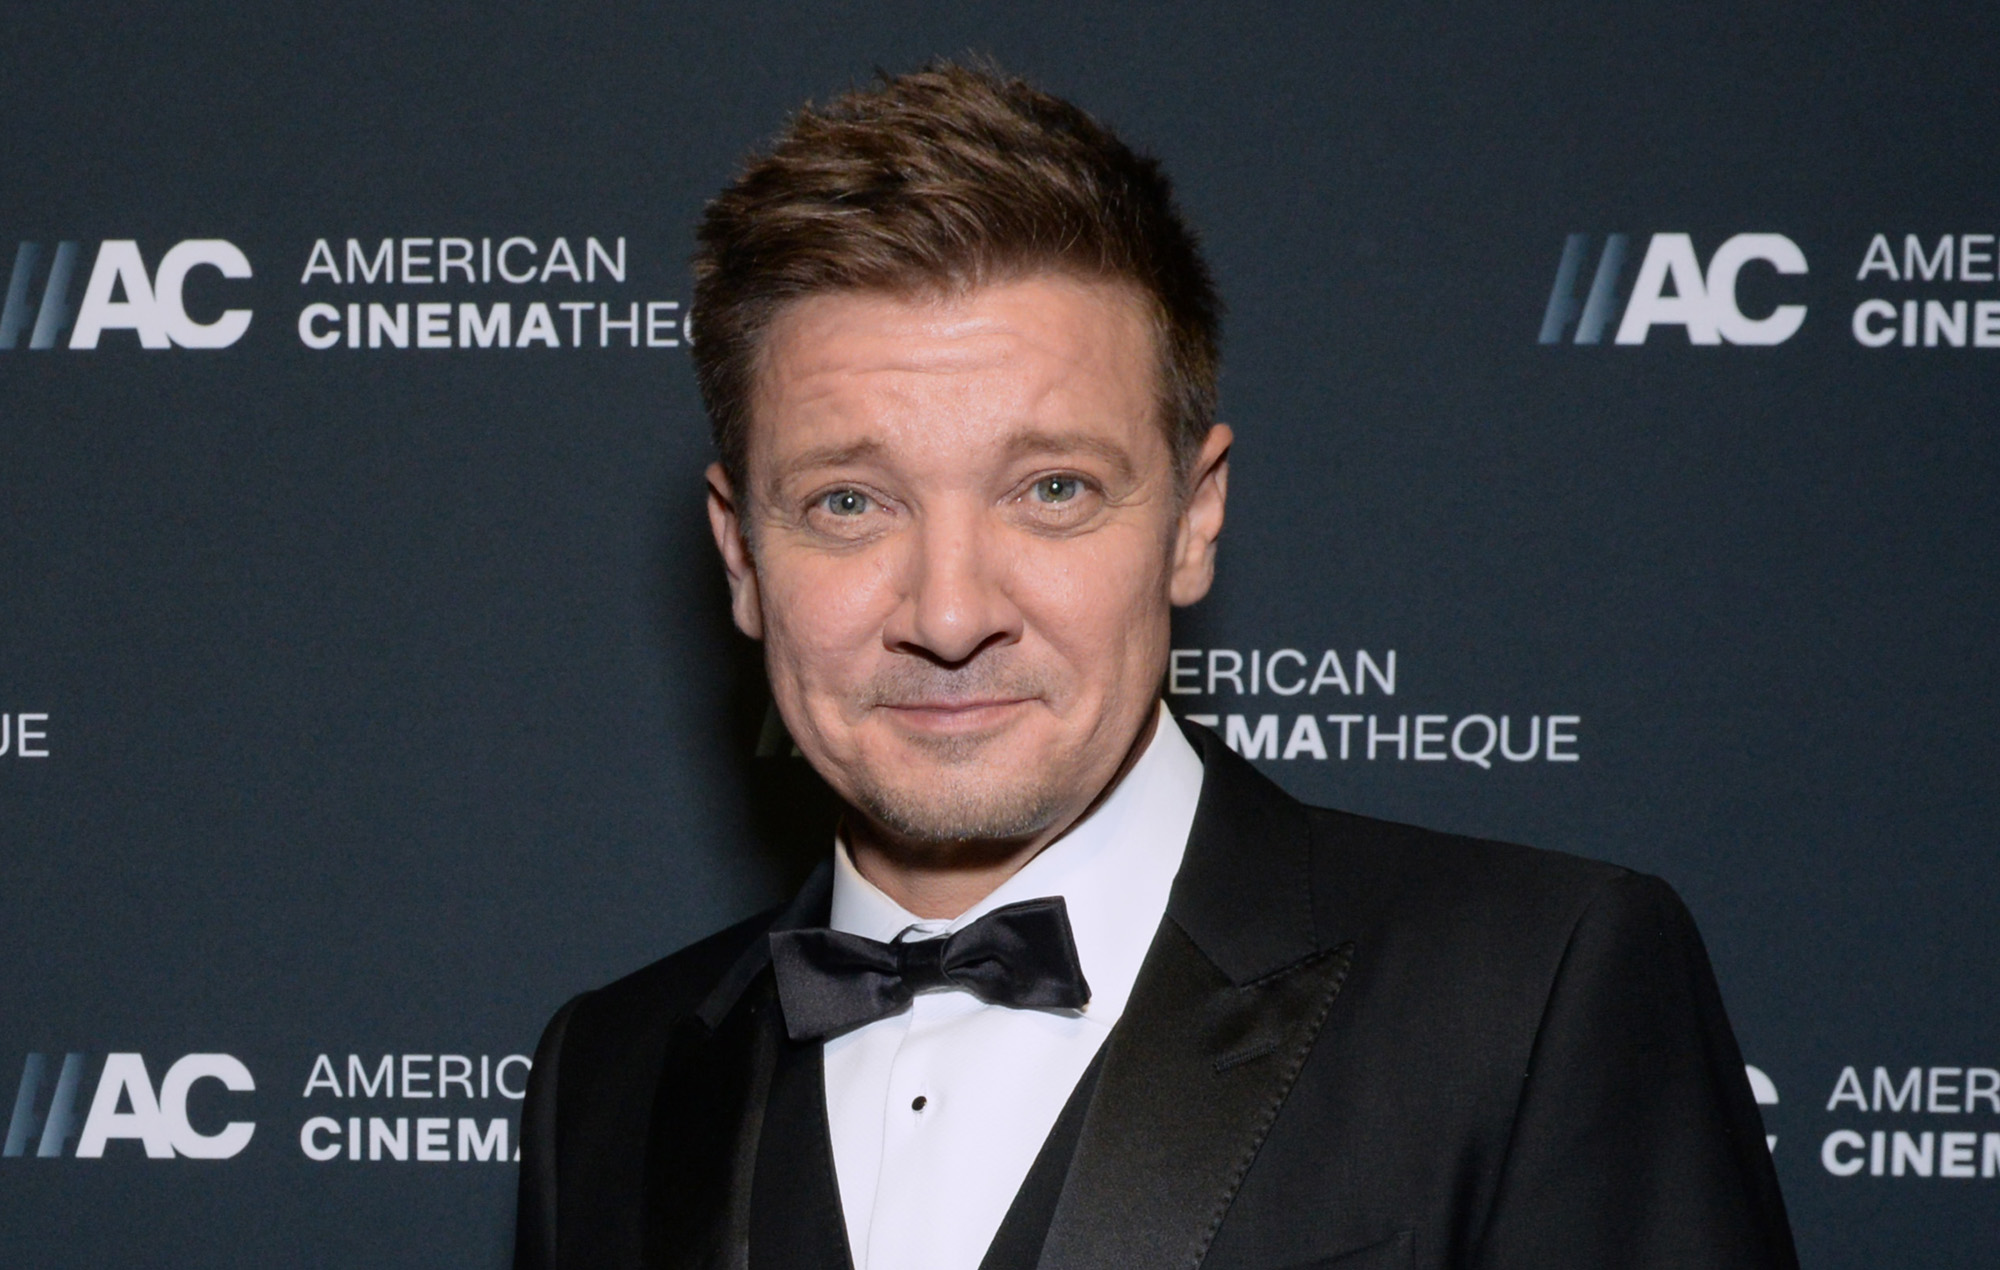 Jeremy Renner To Attend ‘Rennervations’ L.A. Premiere - First Appearance After Snow Plow Incident